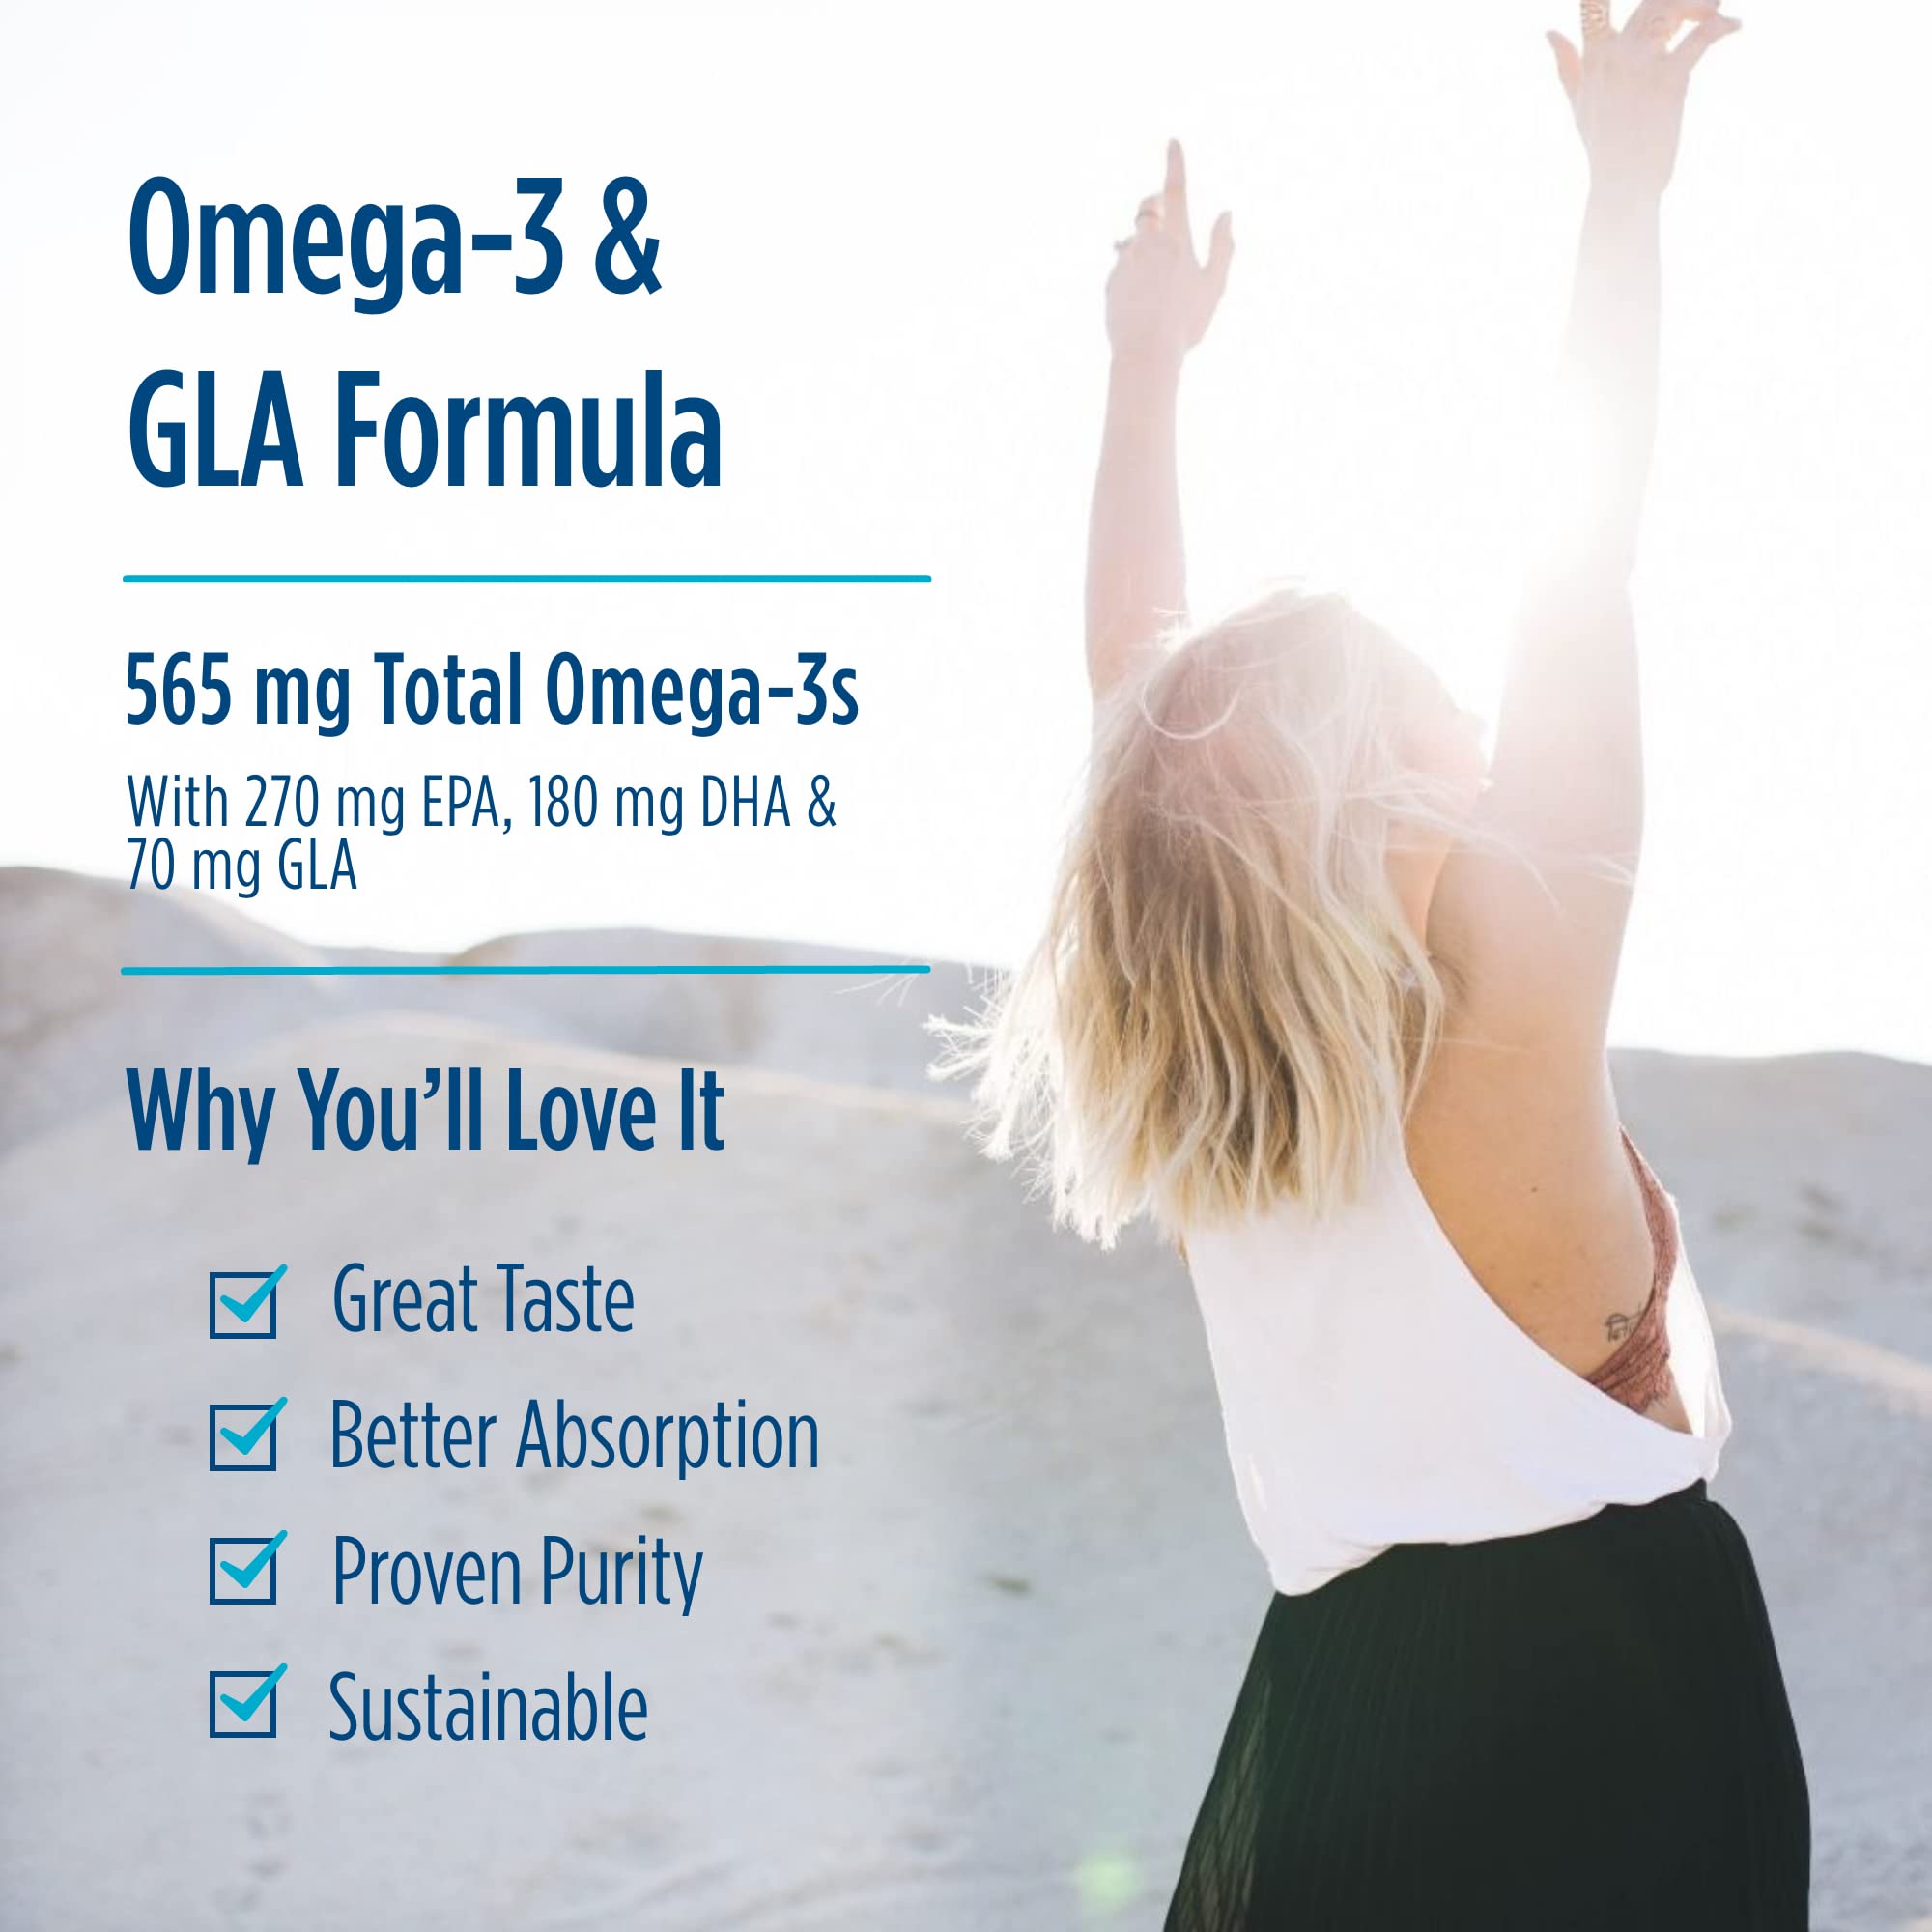 Nordic Naturals - Complete Omega, Supports Healthy Skin, Joints, and Cognition, 120 Soft Gels